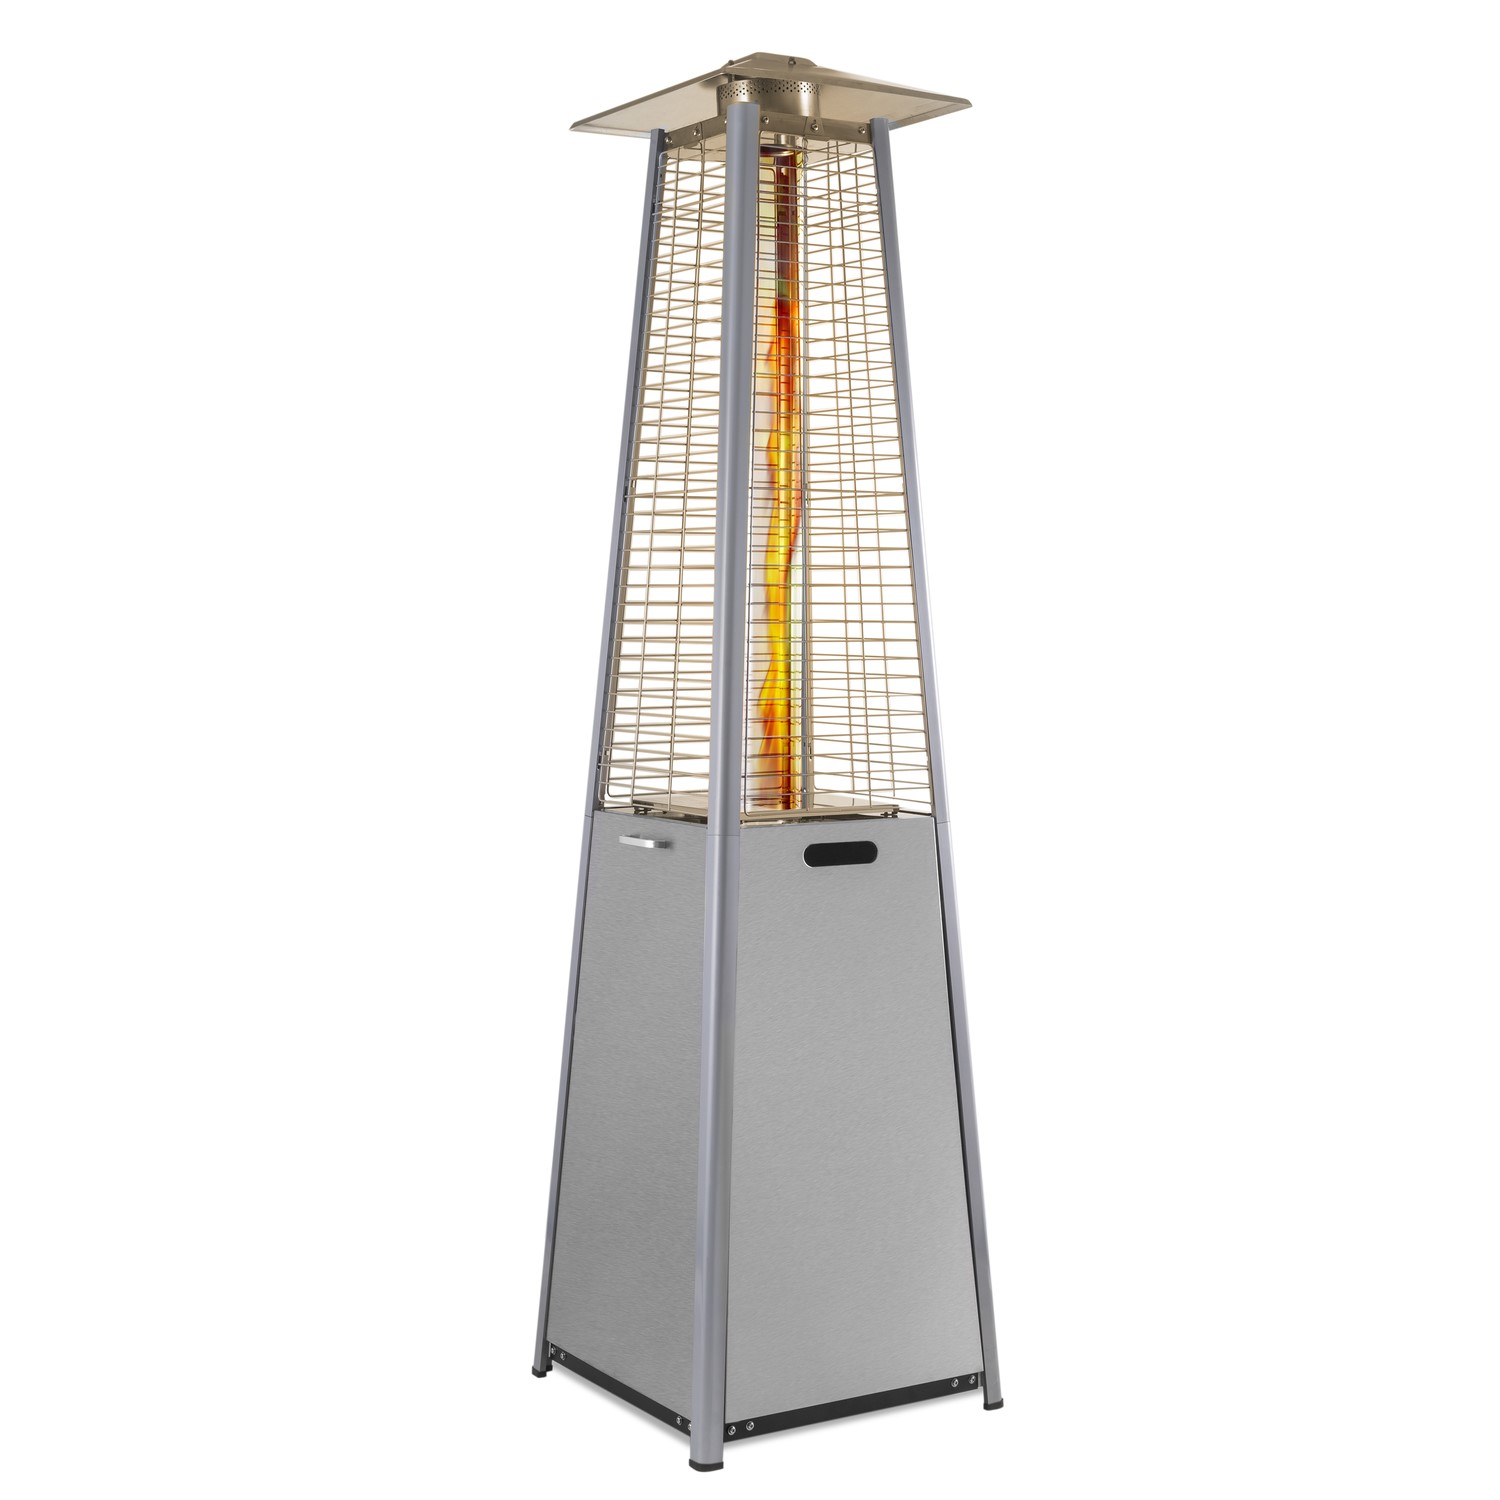 Pyramid Flame Tower Outdoor Gas Patio Heater - Stainless Steel with Free Cover